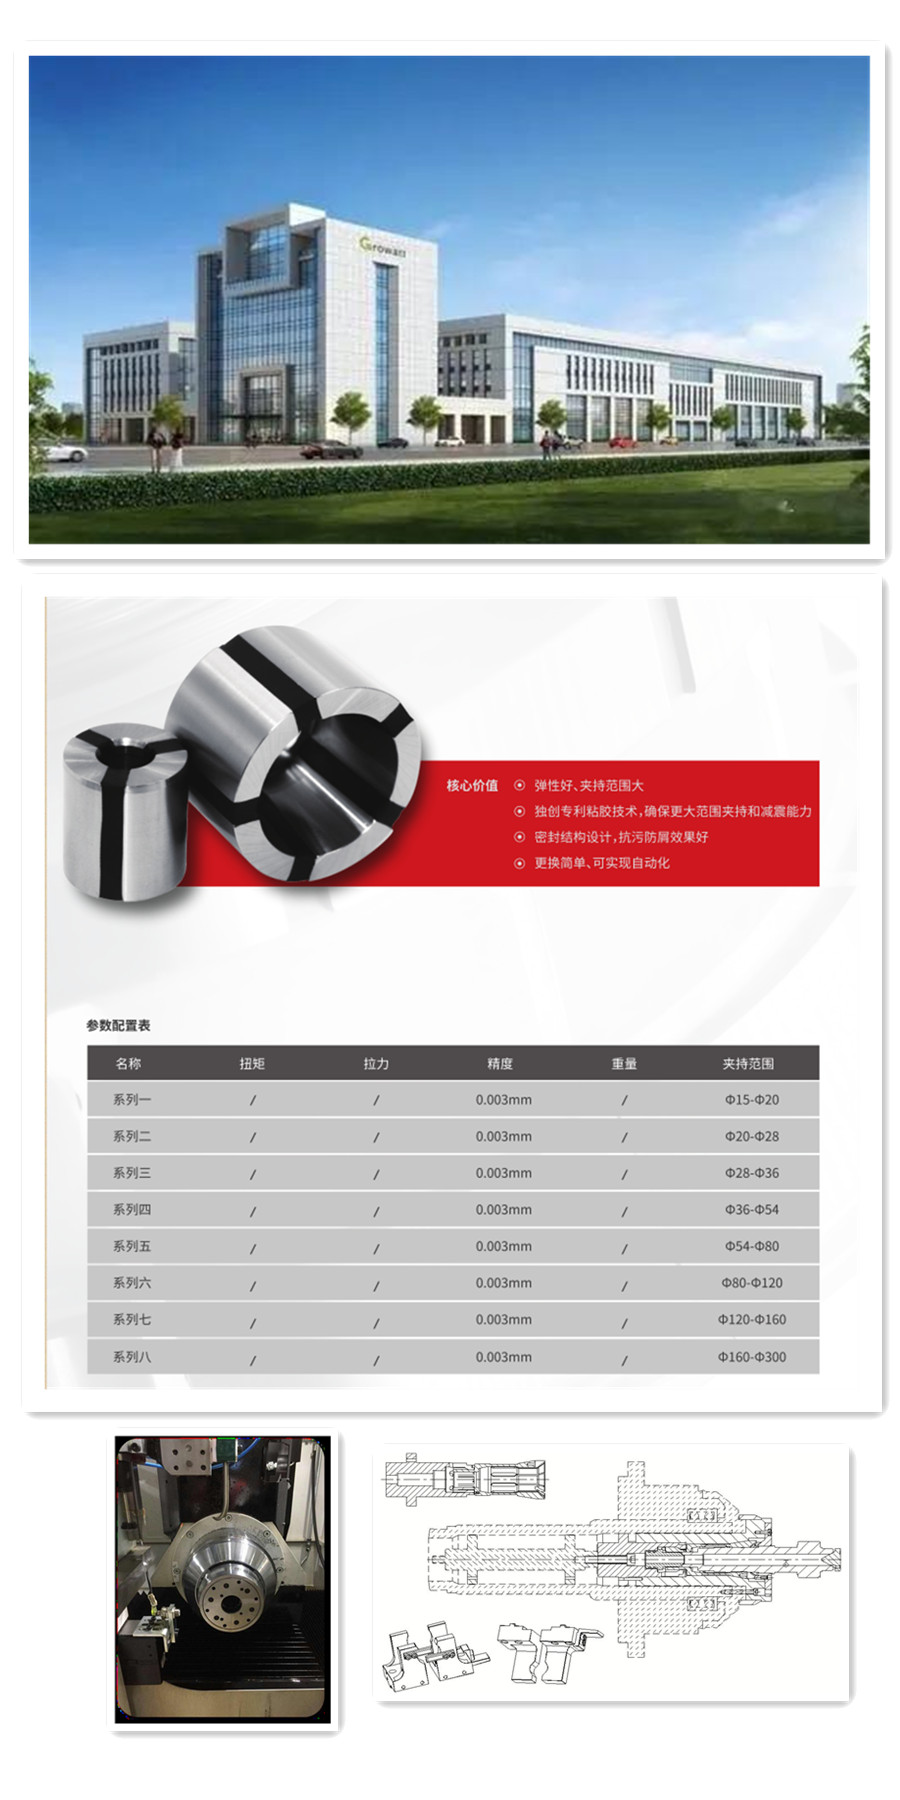 XIAN ENVISION INDUSTRY GROUP CO.,LTD